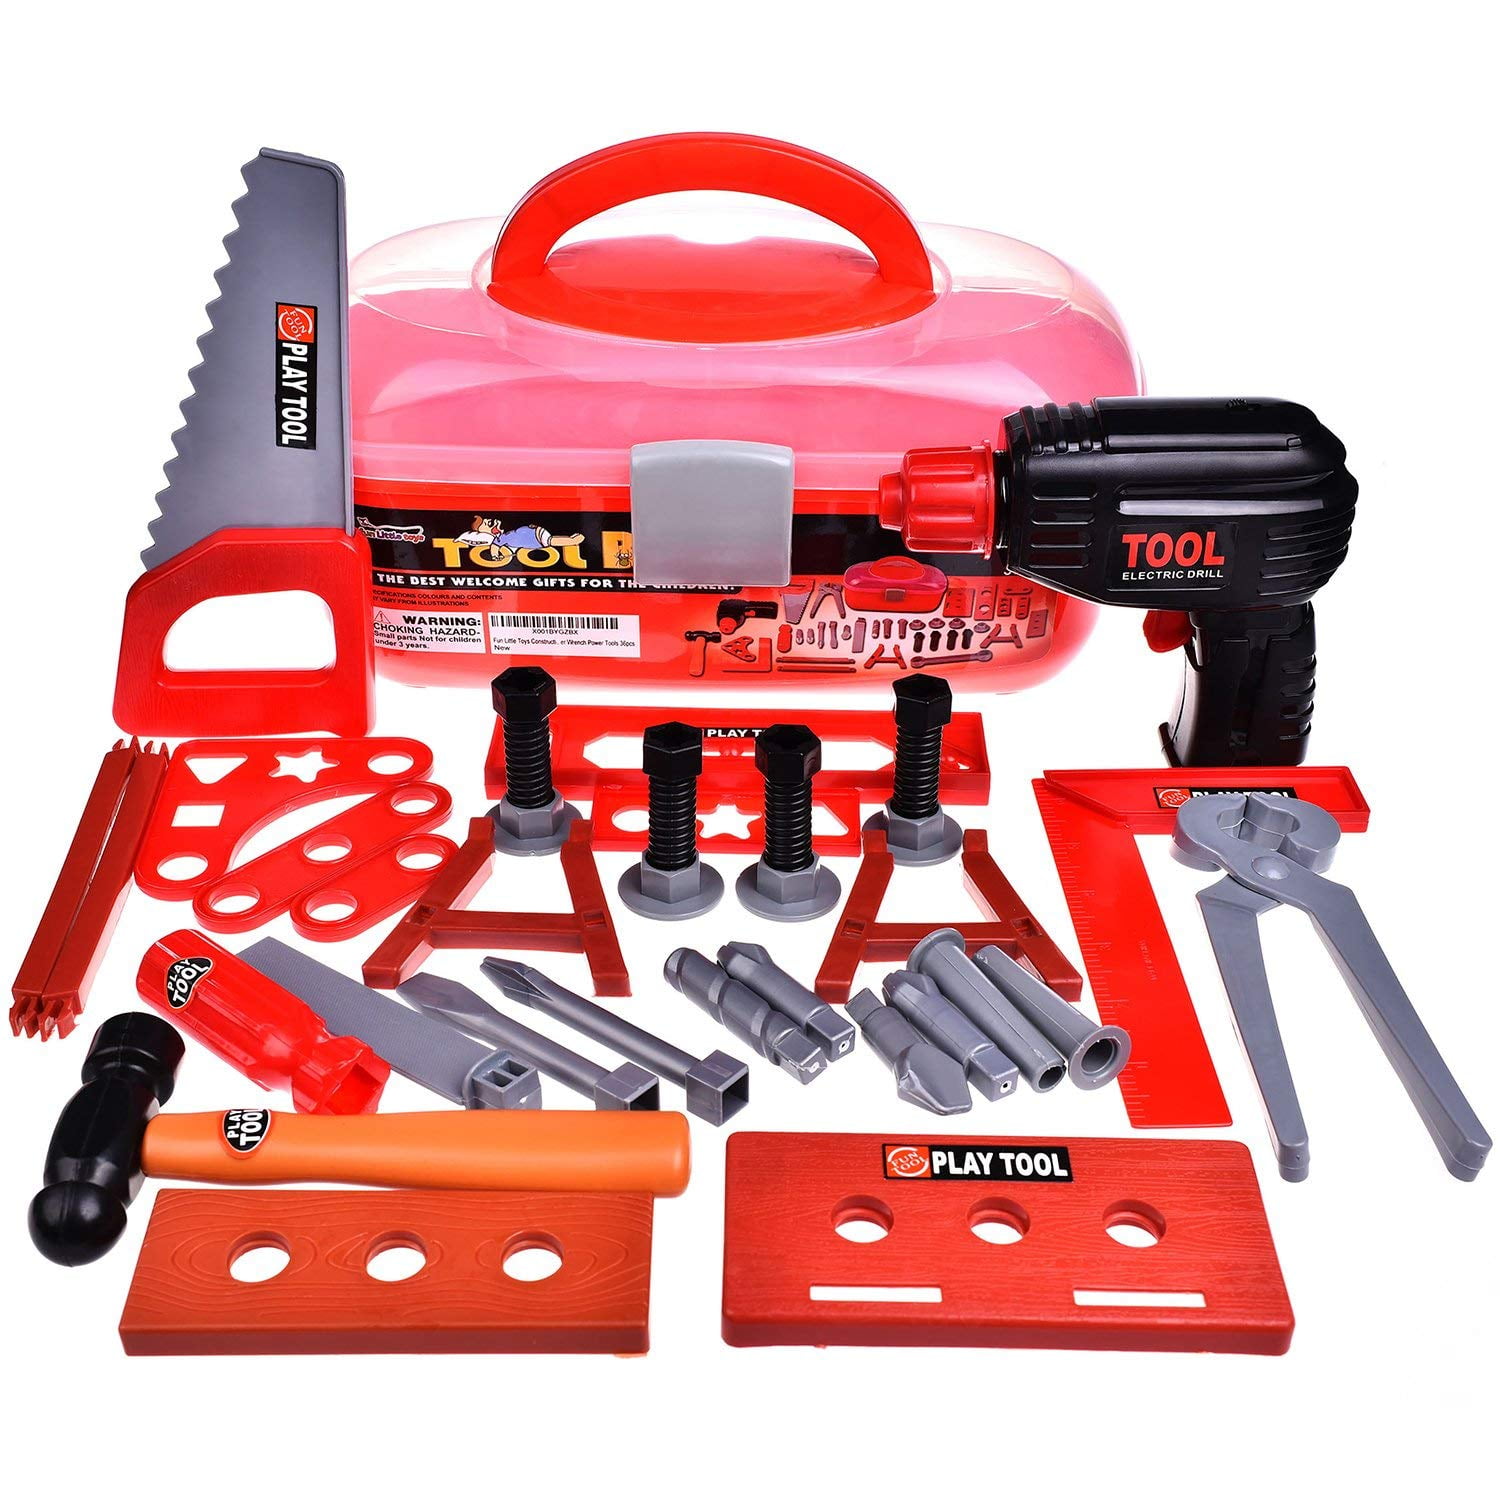 Kids Toy Tool Set Construction Electric 